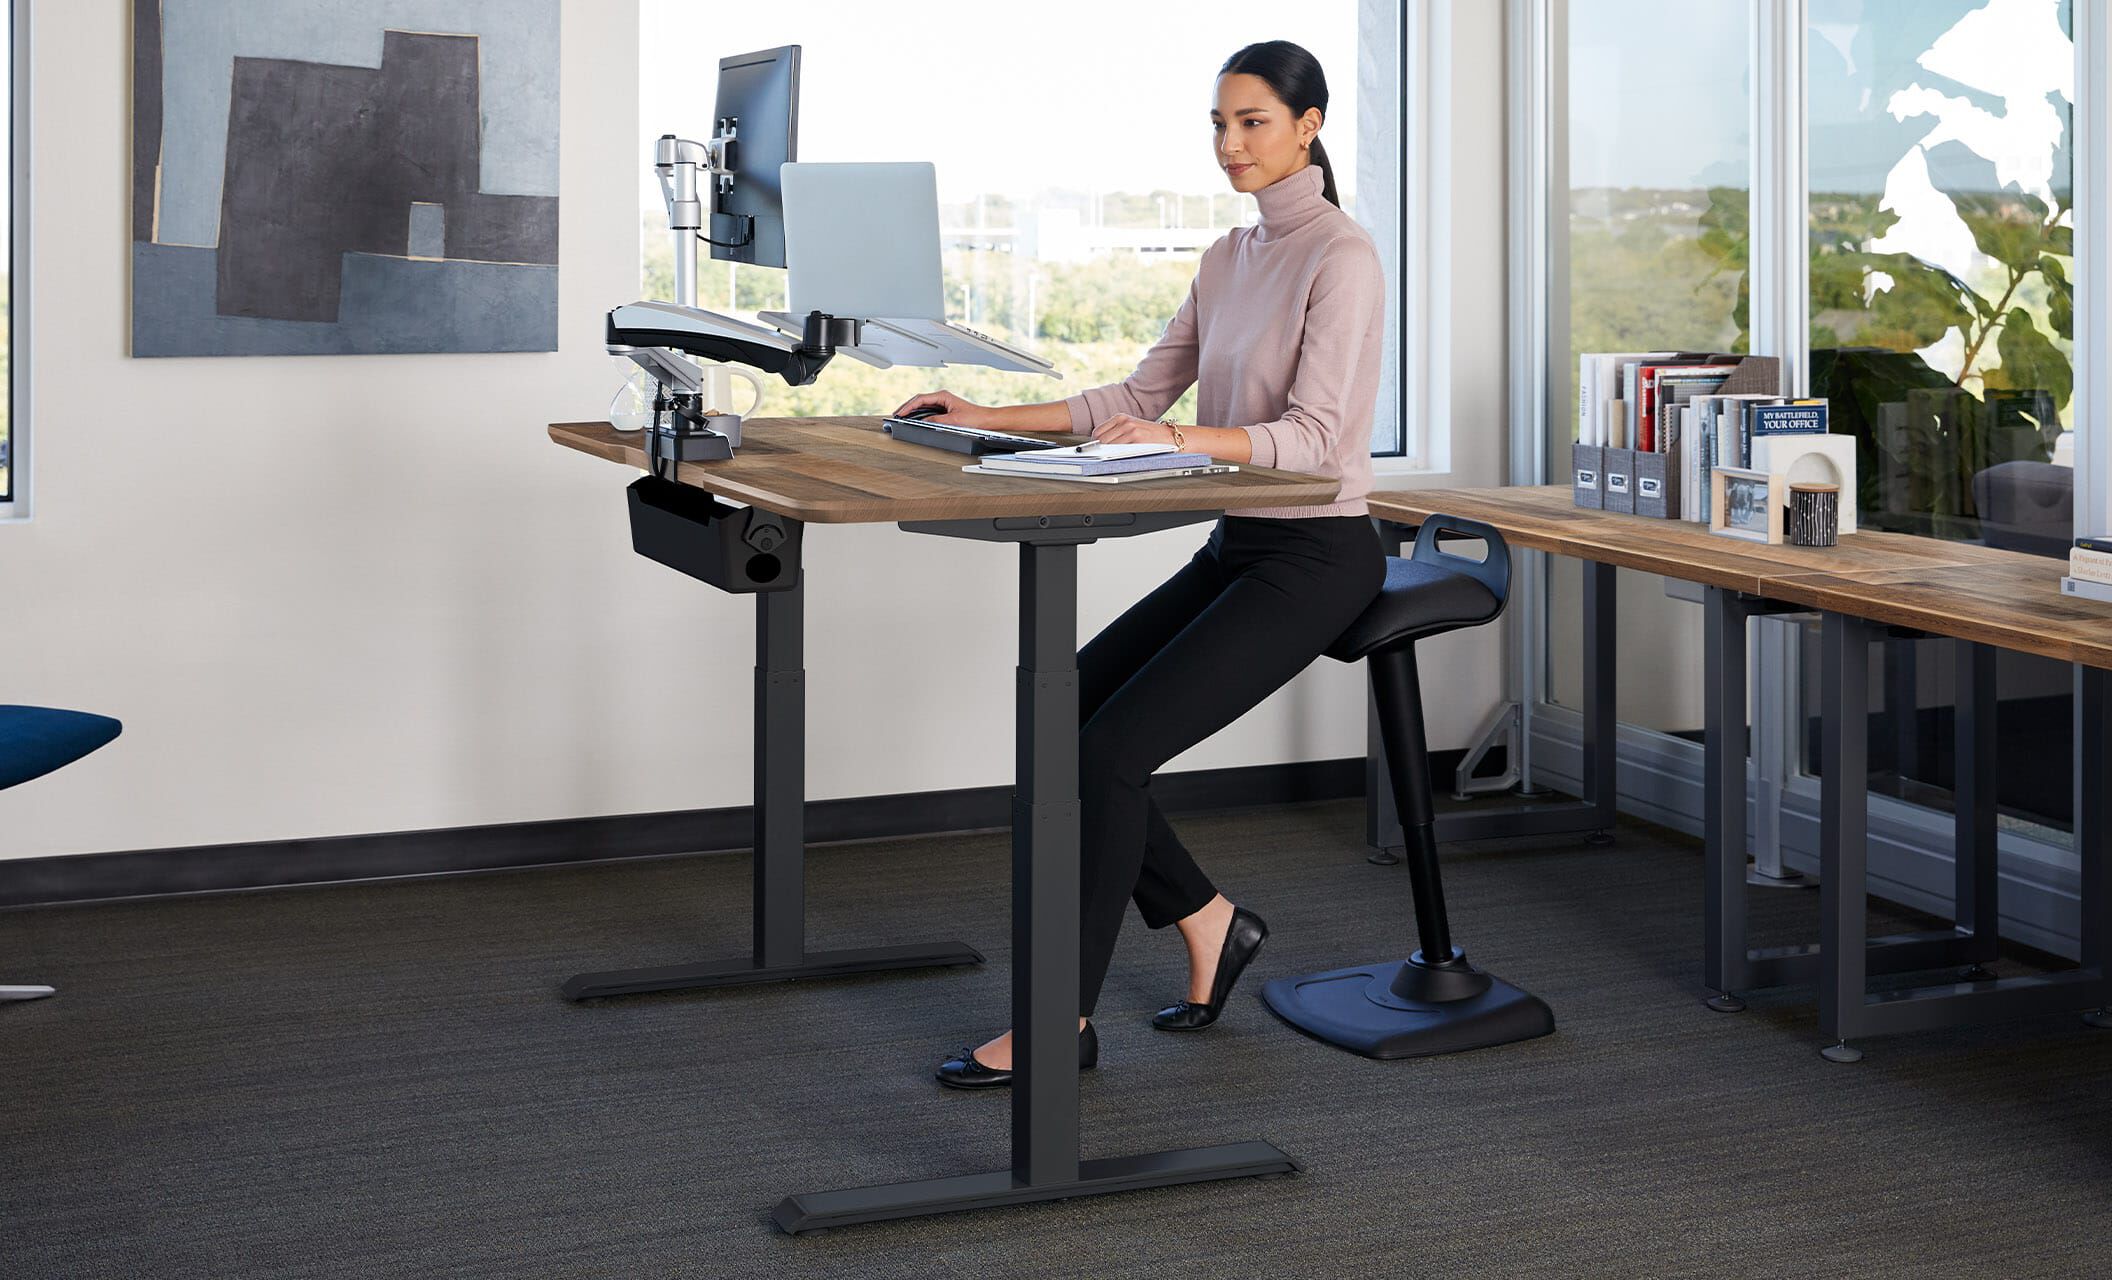 Butcher Block Dual Motor Sit to Stand Desk Solid Top with Height Adjustable Steel Legs Push Button Memory Settings Vari Electric Standing Desk 60 x 30 Work or Home Office Desk -